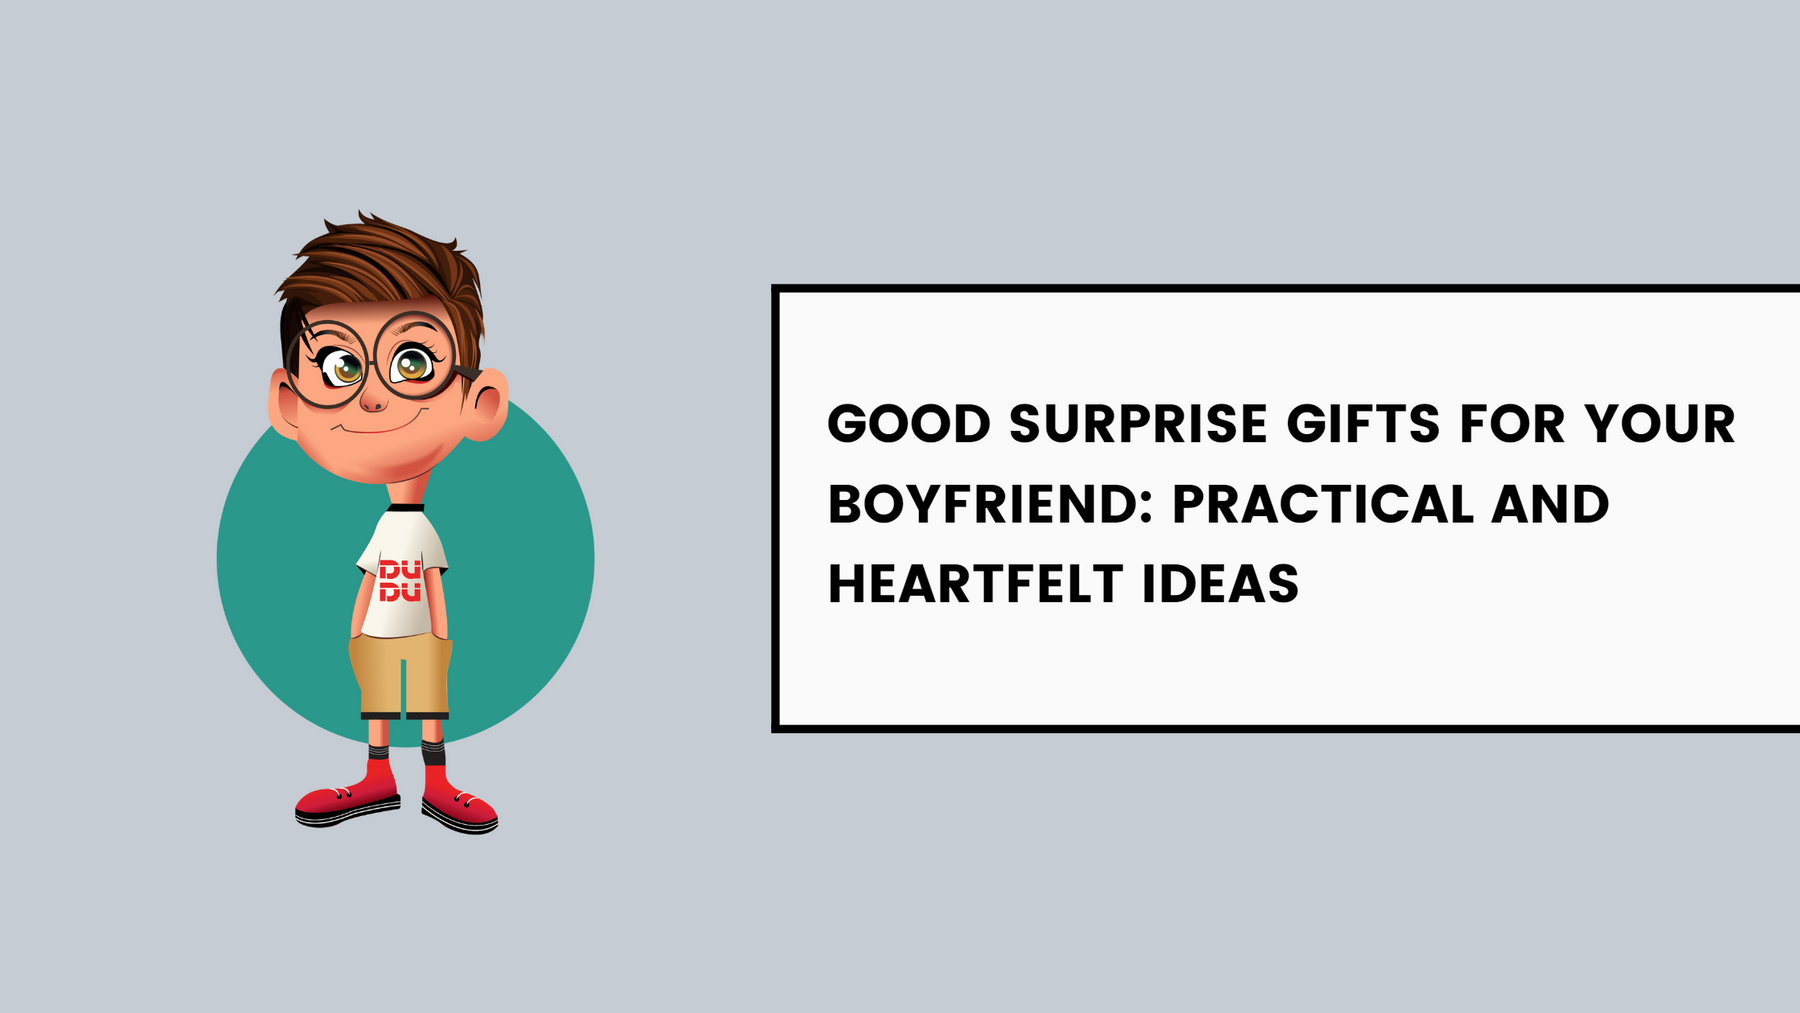 Good Surprise Gifts For Your Boyfriend: Practical And Heartfelt Ideas